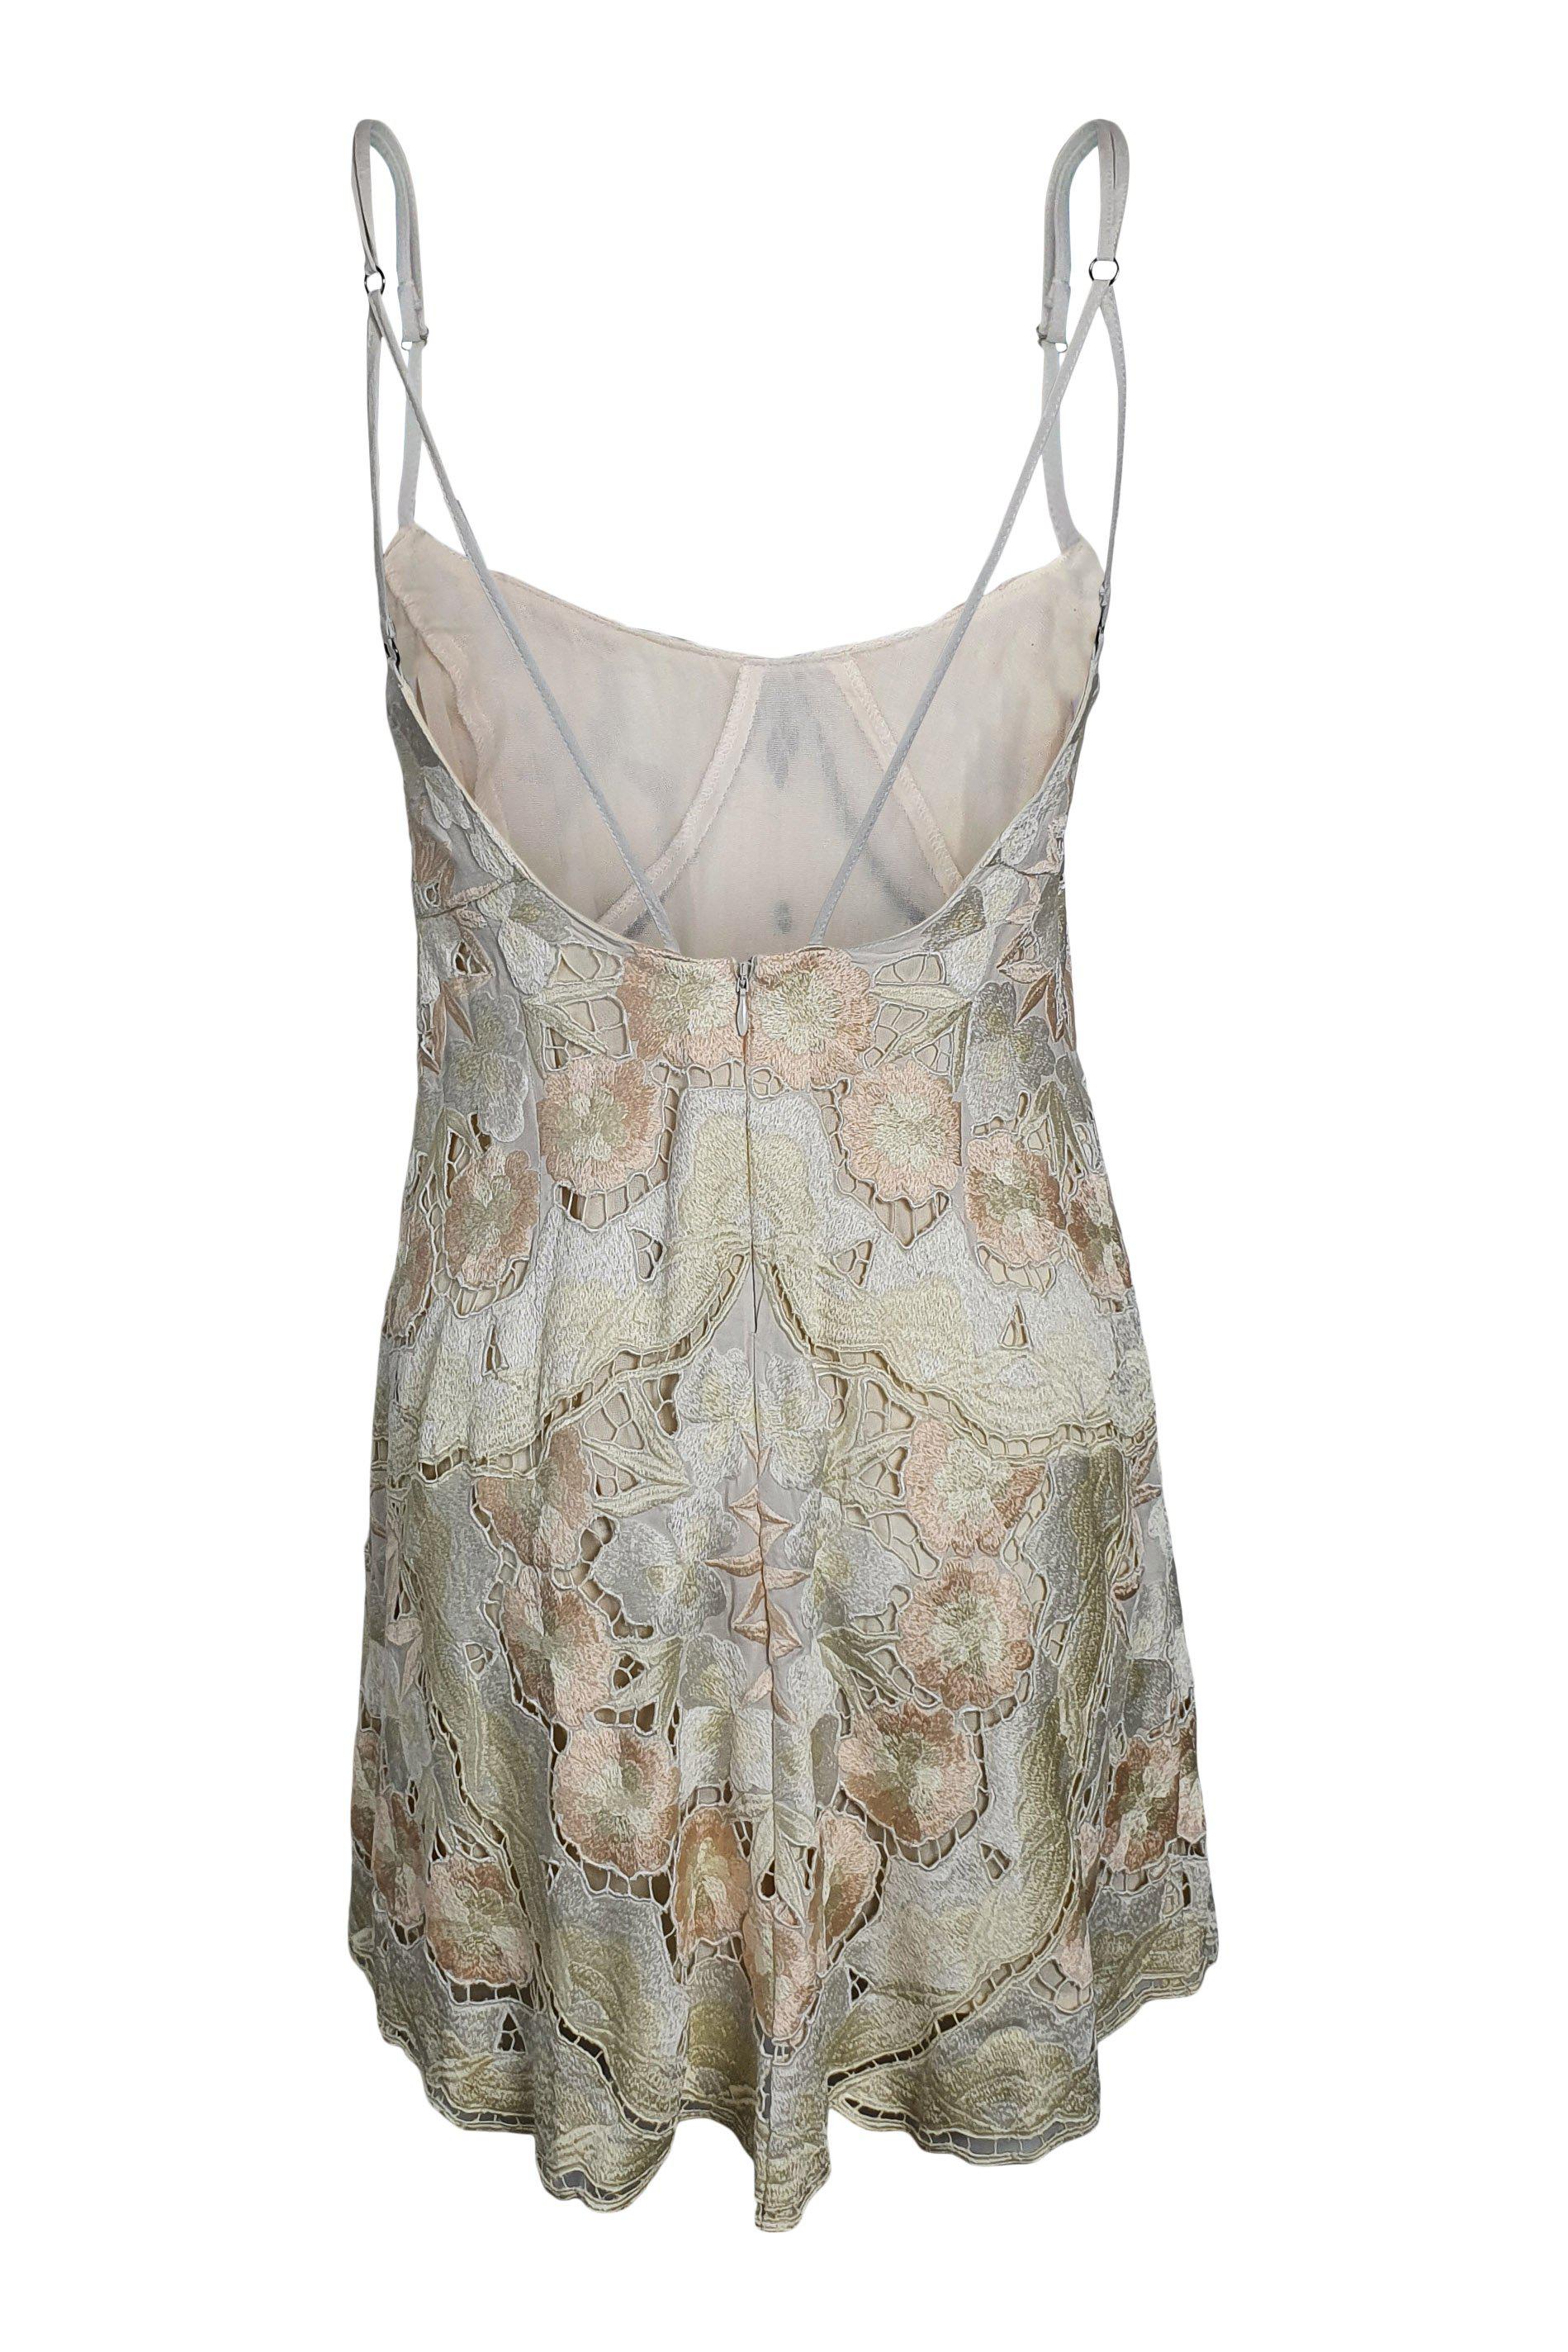 FREE PEOPLE Ivory Floral Embroidered Low Back Strappy Micro Mini Dress (0)-The Freperie